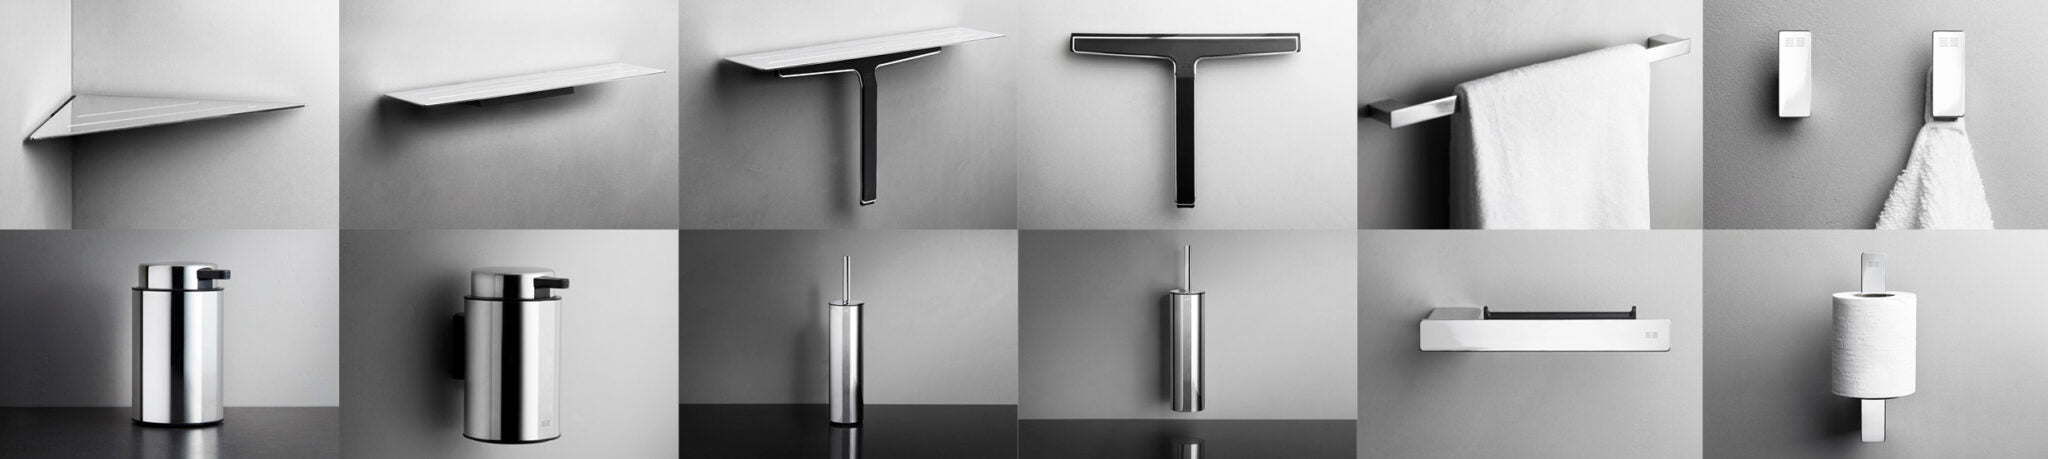 Unidrain stainless steel hand polished overview